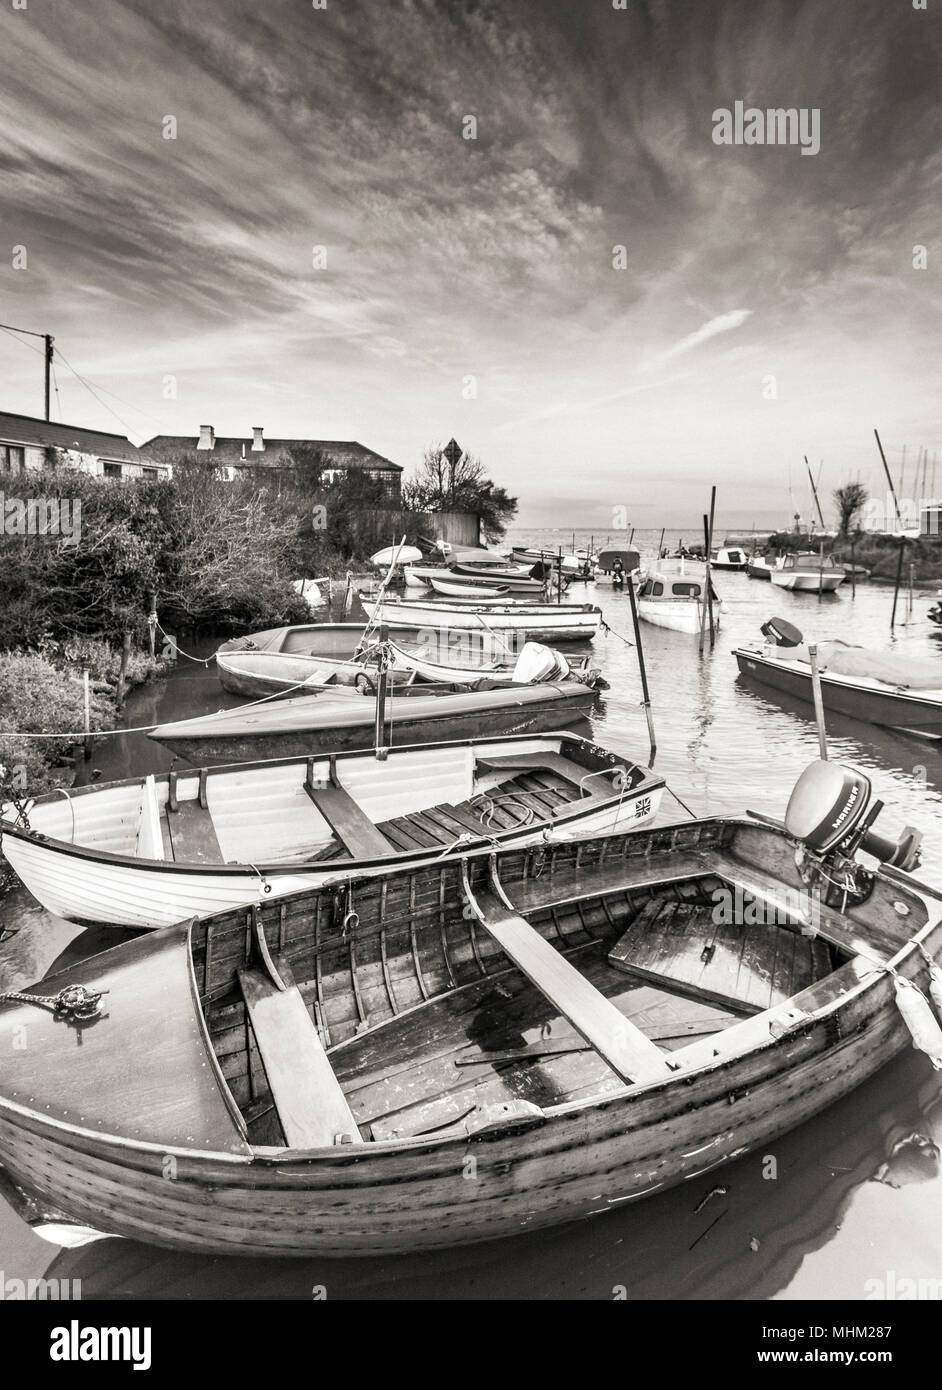 Boats at the harbour quay in black and white Stock Photo